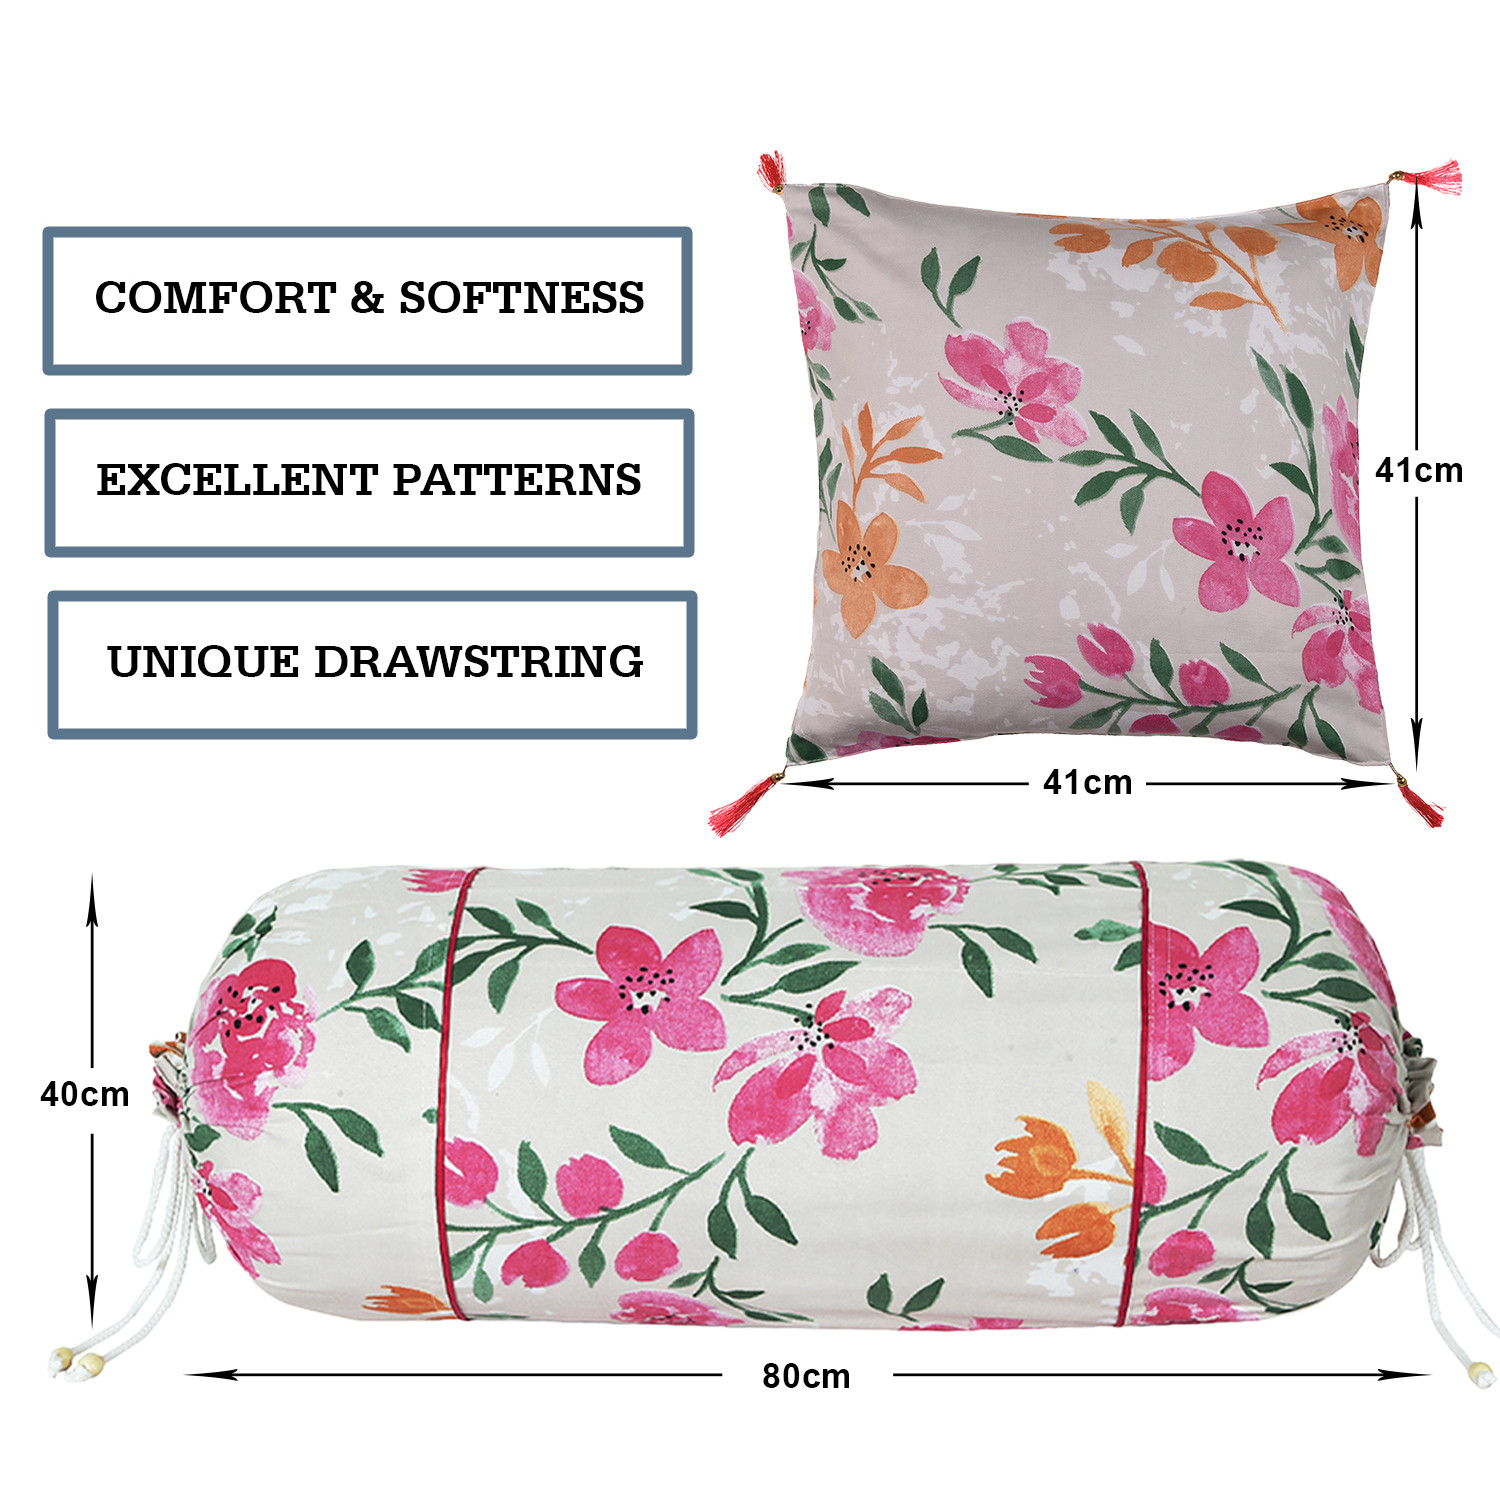 Kuber Industries Bolster Cover | Soft Cotton 2 Piece Bolster Cover Set  | 3 Piece Square Cushion Cover Set | Green Leaf Print Bolster & Cushion Cover Set | Pack of 5  | Multicolor